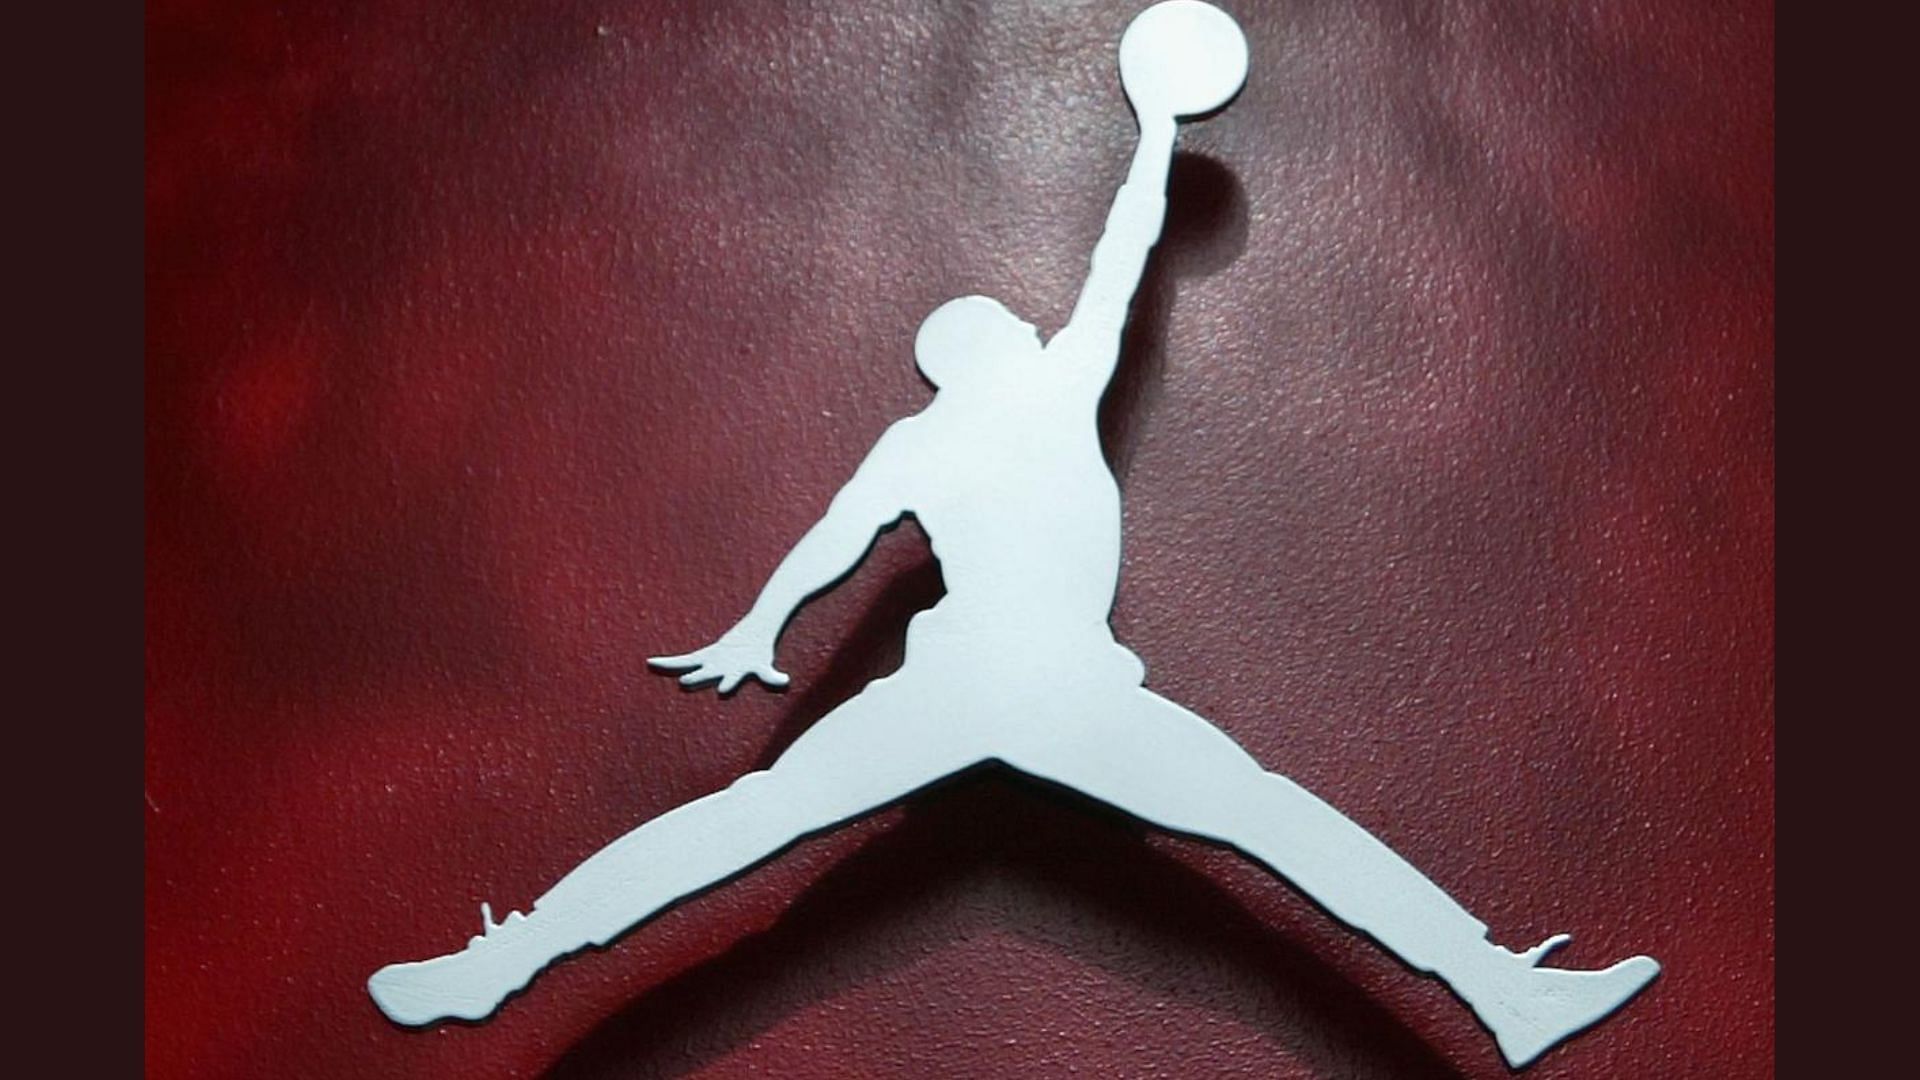 The Jumpman logos are placed on the tongues and heels (Image via Twitter/@trevorleit)